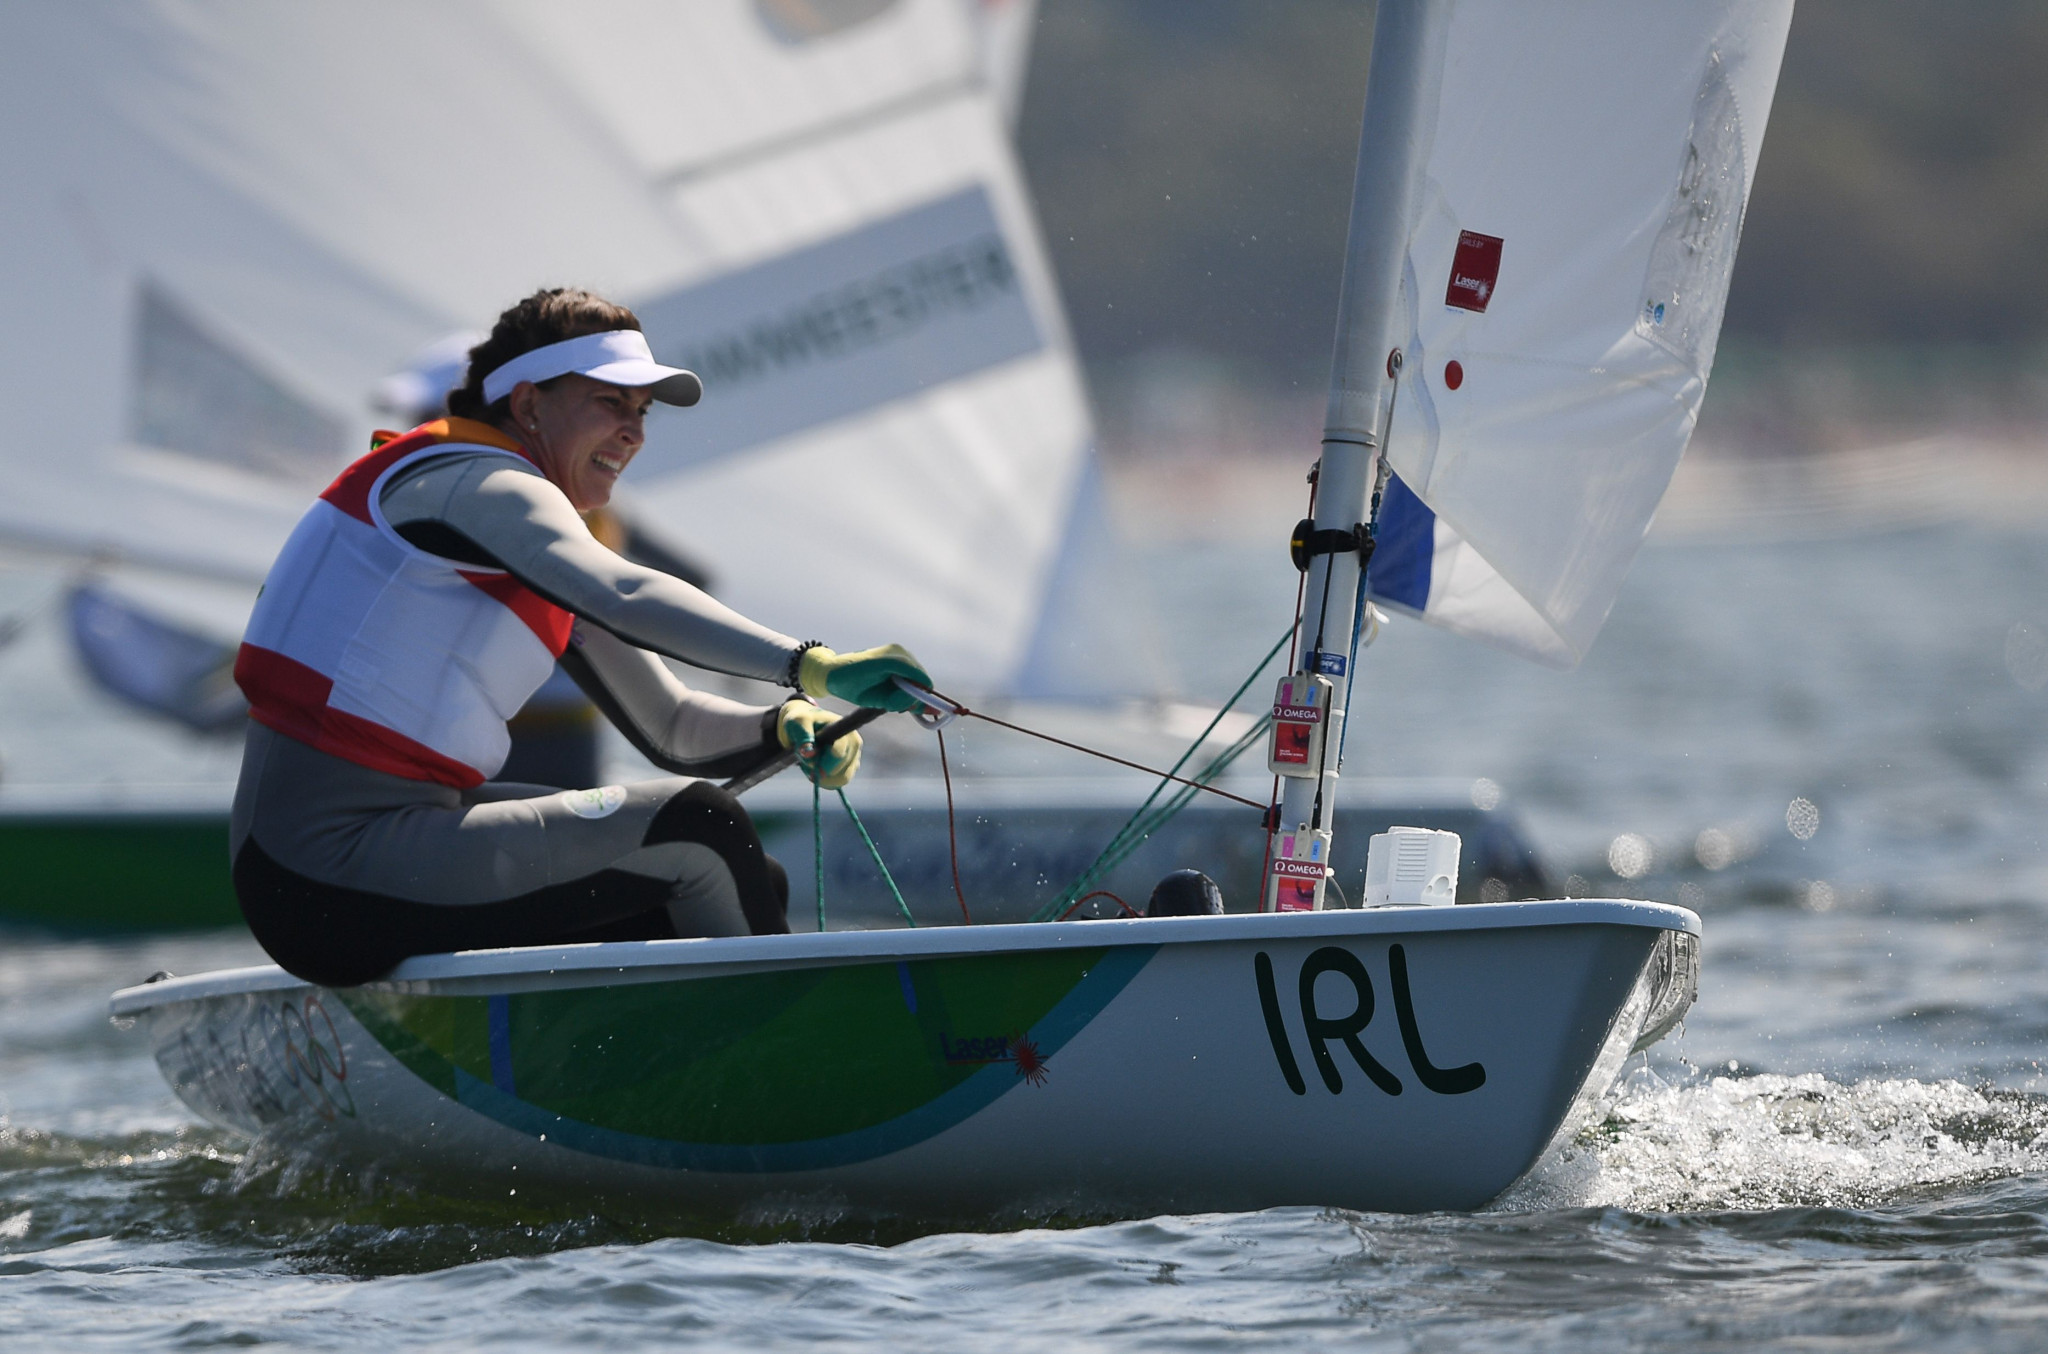 The highlight of Harry Hermon's 16-year term as chief executive of Irish Sailing was Annalise Murphy's Olympic silver medal at Rio 2016 ©Getty Images